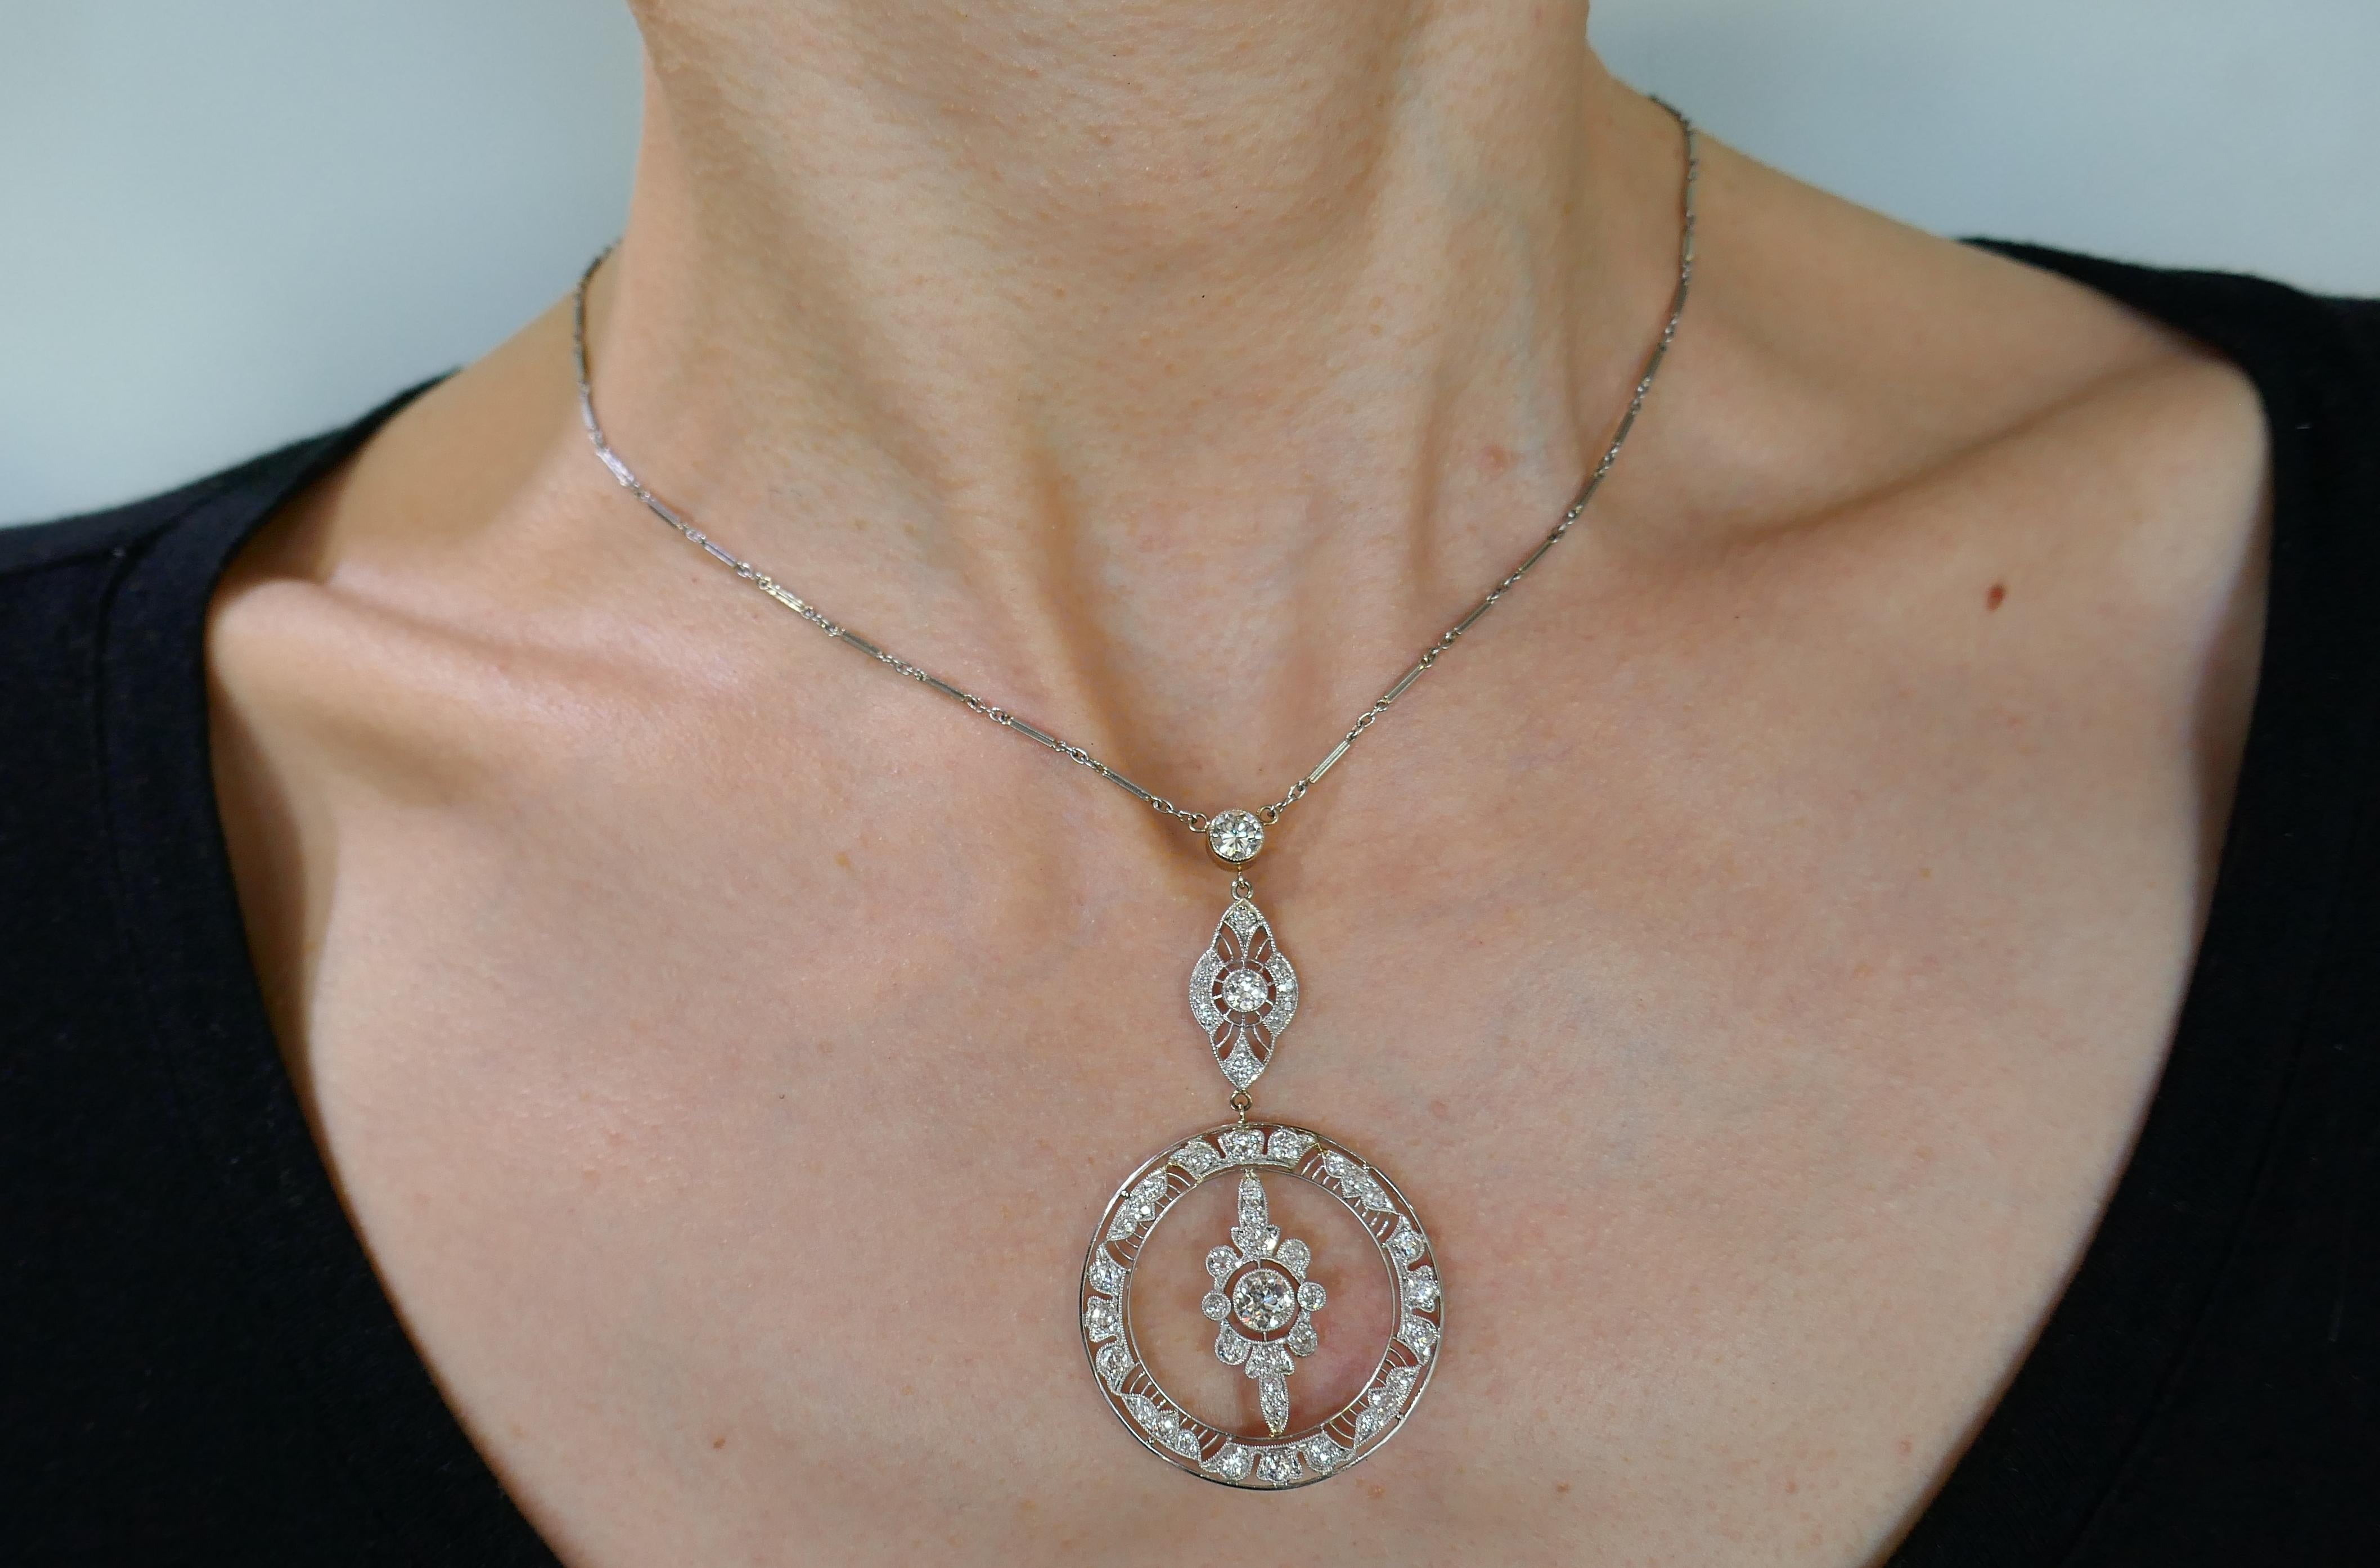 Classy Art Deco diamond and platinum necklace. Elegant and timeless, the necklace is a great addition to your jewelry collection.
Made of platinum (tested) and set with Old European cut diamonds (I-K color, VS clarity. Three larger diamonds weigh